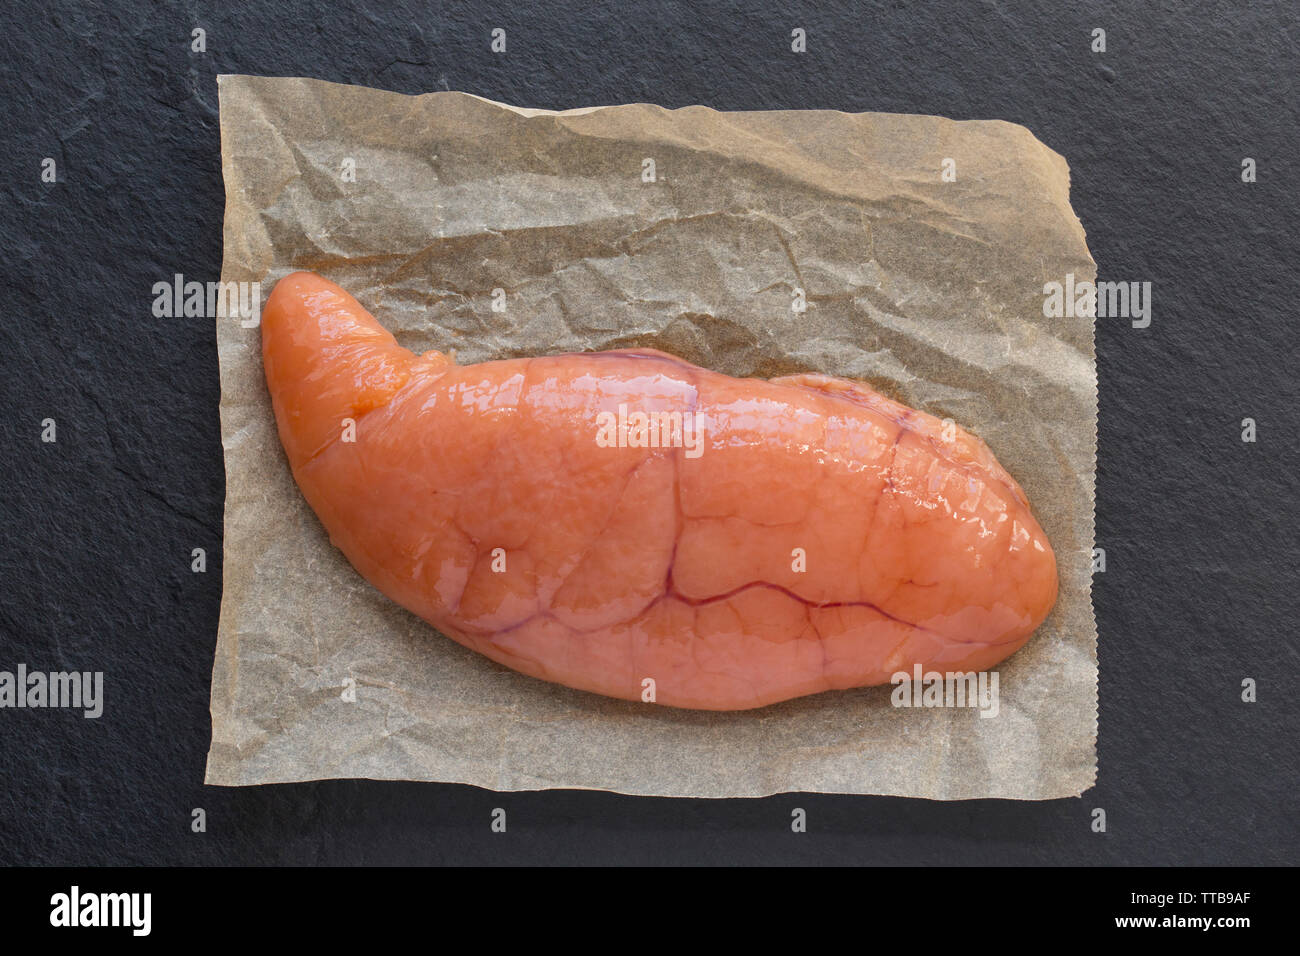 Raw, uncooked cod roe bought from a supermarket in the UK. The cod, Gadus  morhua, was caught in the north eastern Atlantic. Dorset England UK GB  Stock Photo - Alamy